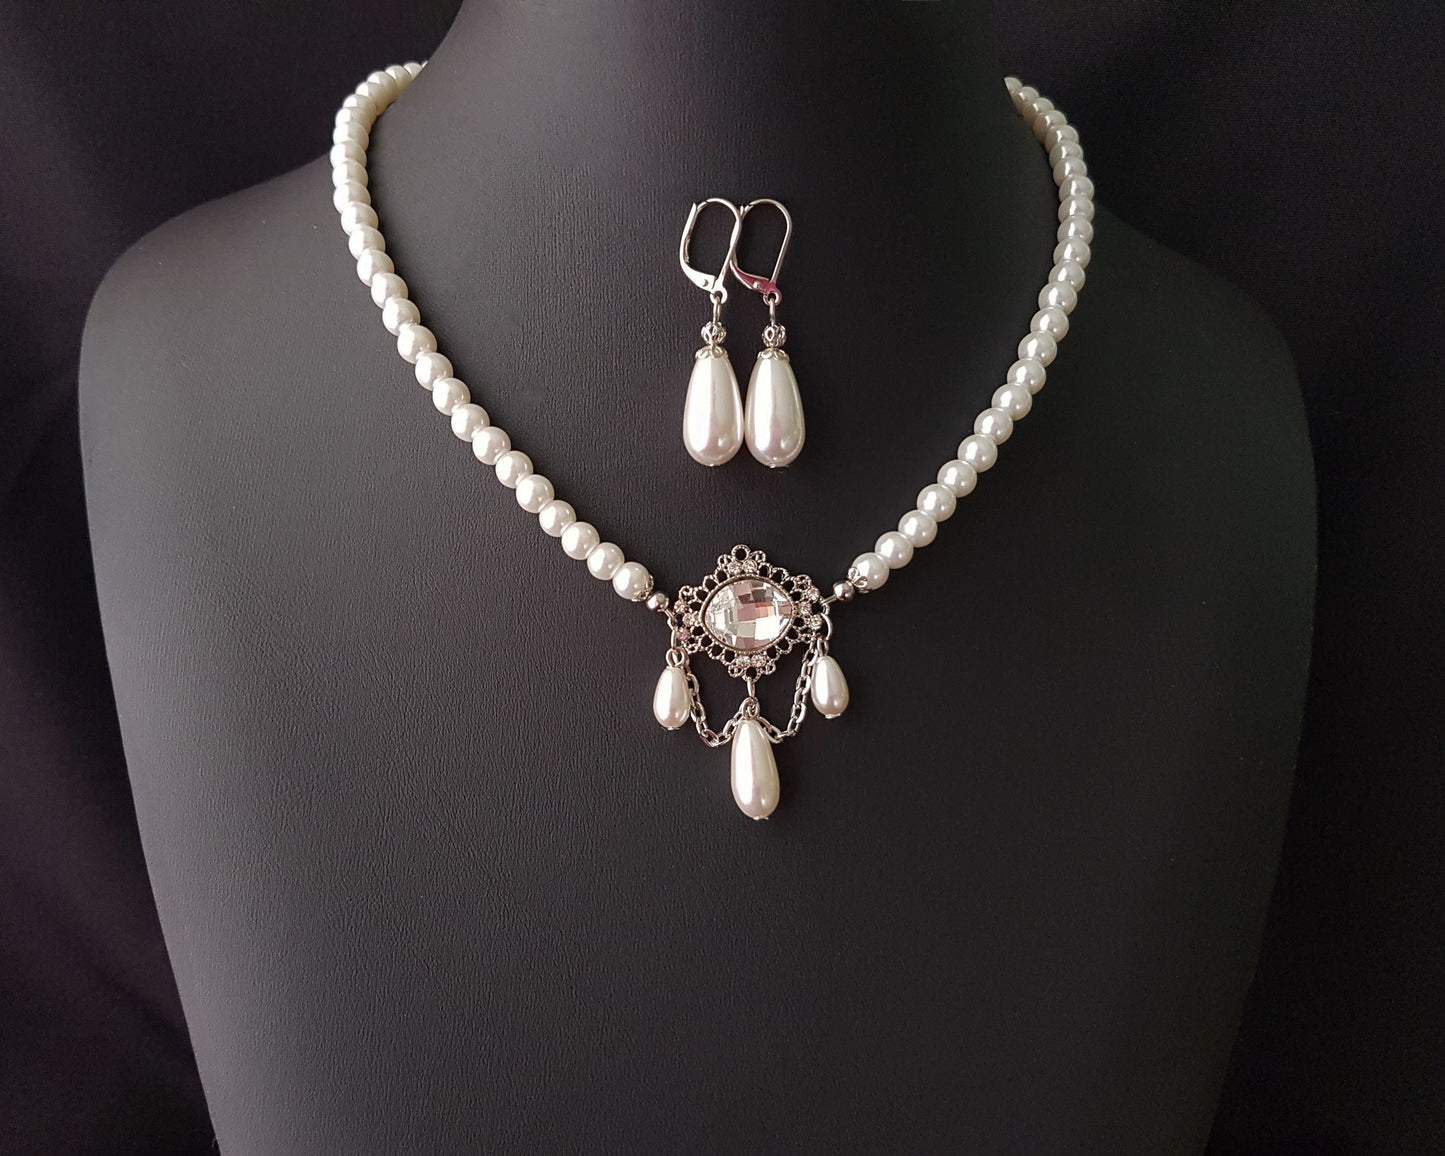 Victorian Style Pearl Crystal Necklace and Earrings Set with white pearl necklace with large clear crystal and three dangling drop pearls and long back chain with another pearl drop. The matching earrings are drop shaped pearls, displayed on black. 